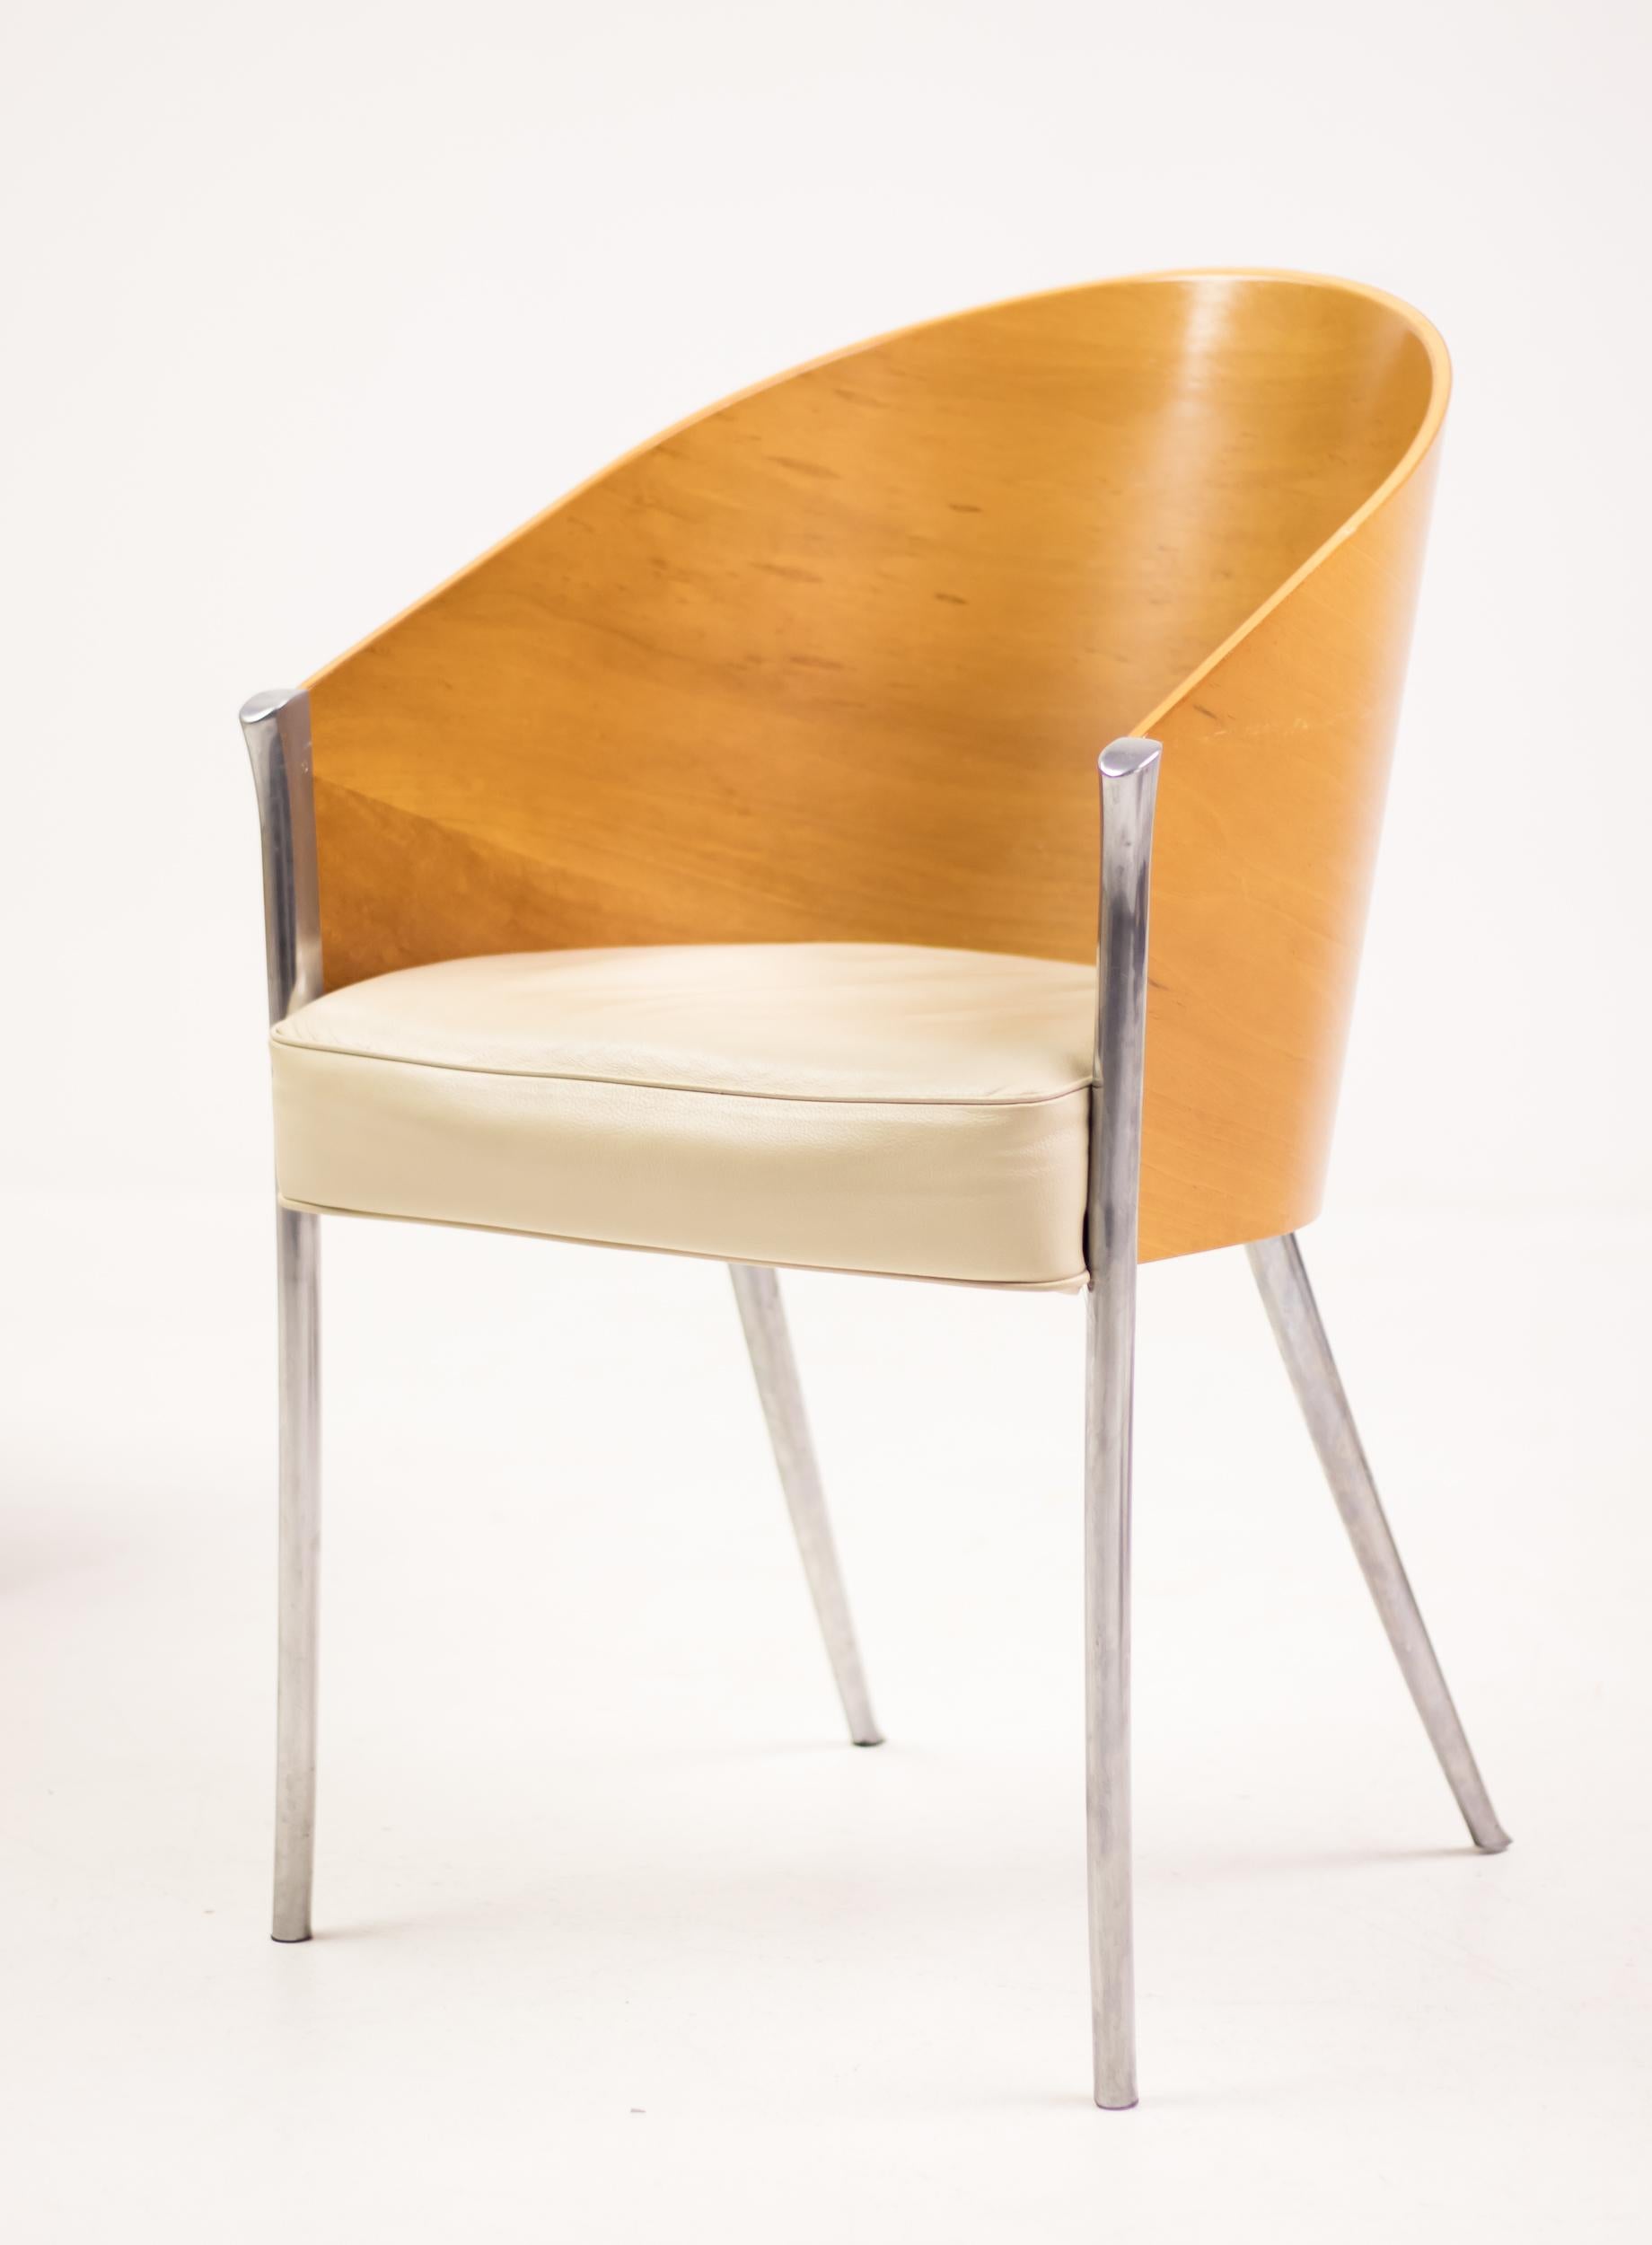 Set of four King Costes chairs designed in 1992 by Philippe Starck for Aleph.
The chairs are fitted with 4 polished aluminium legs and a curved plywood shell in light mahogany.
Seats in sand colored leather.
Marked at the bottom with Starck